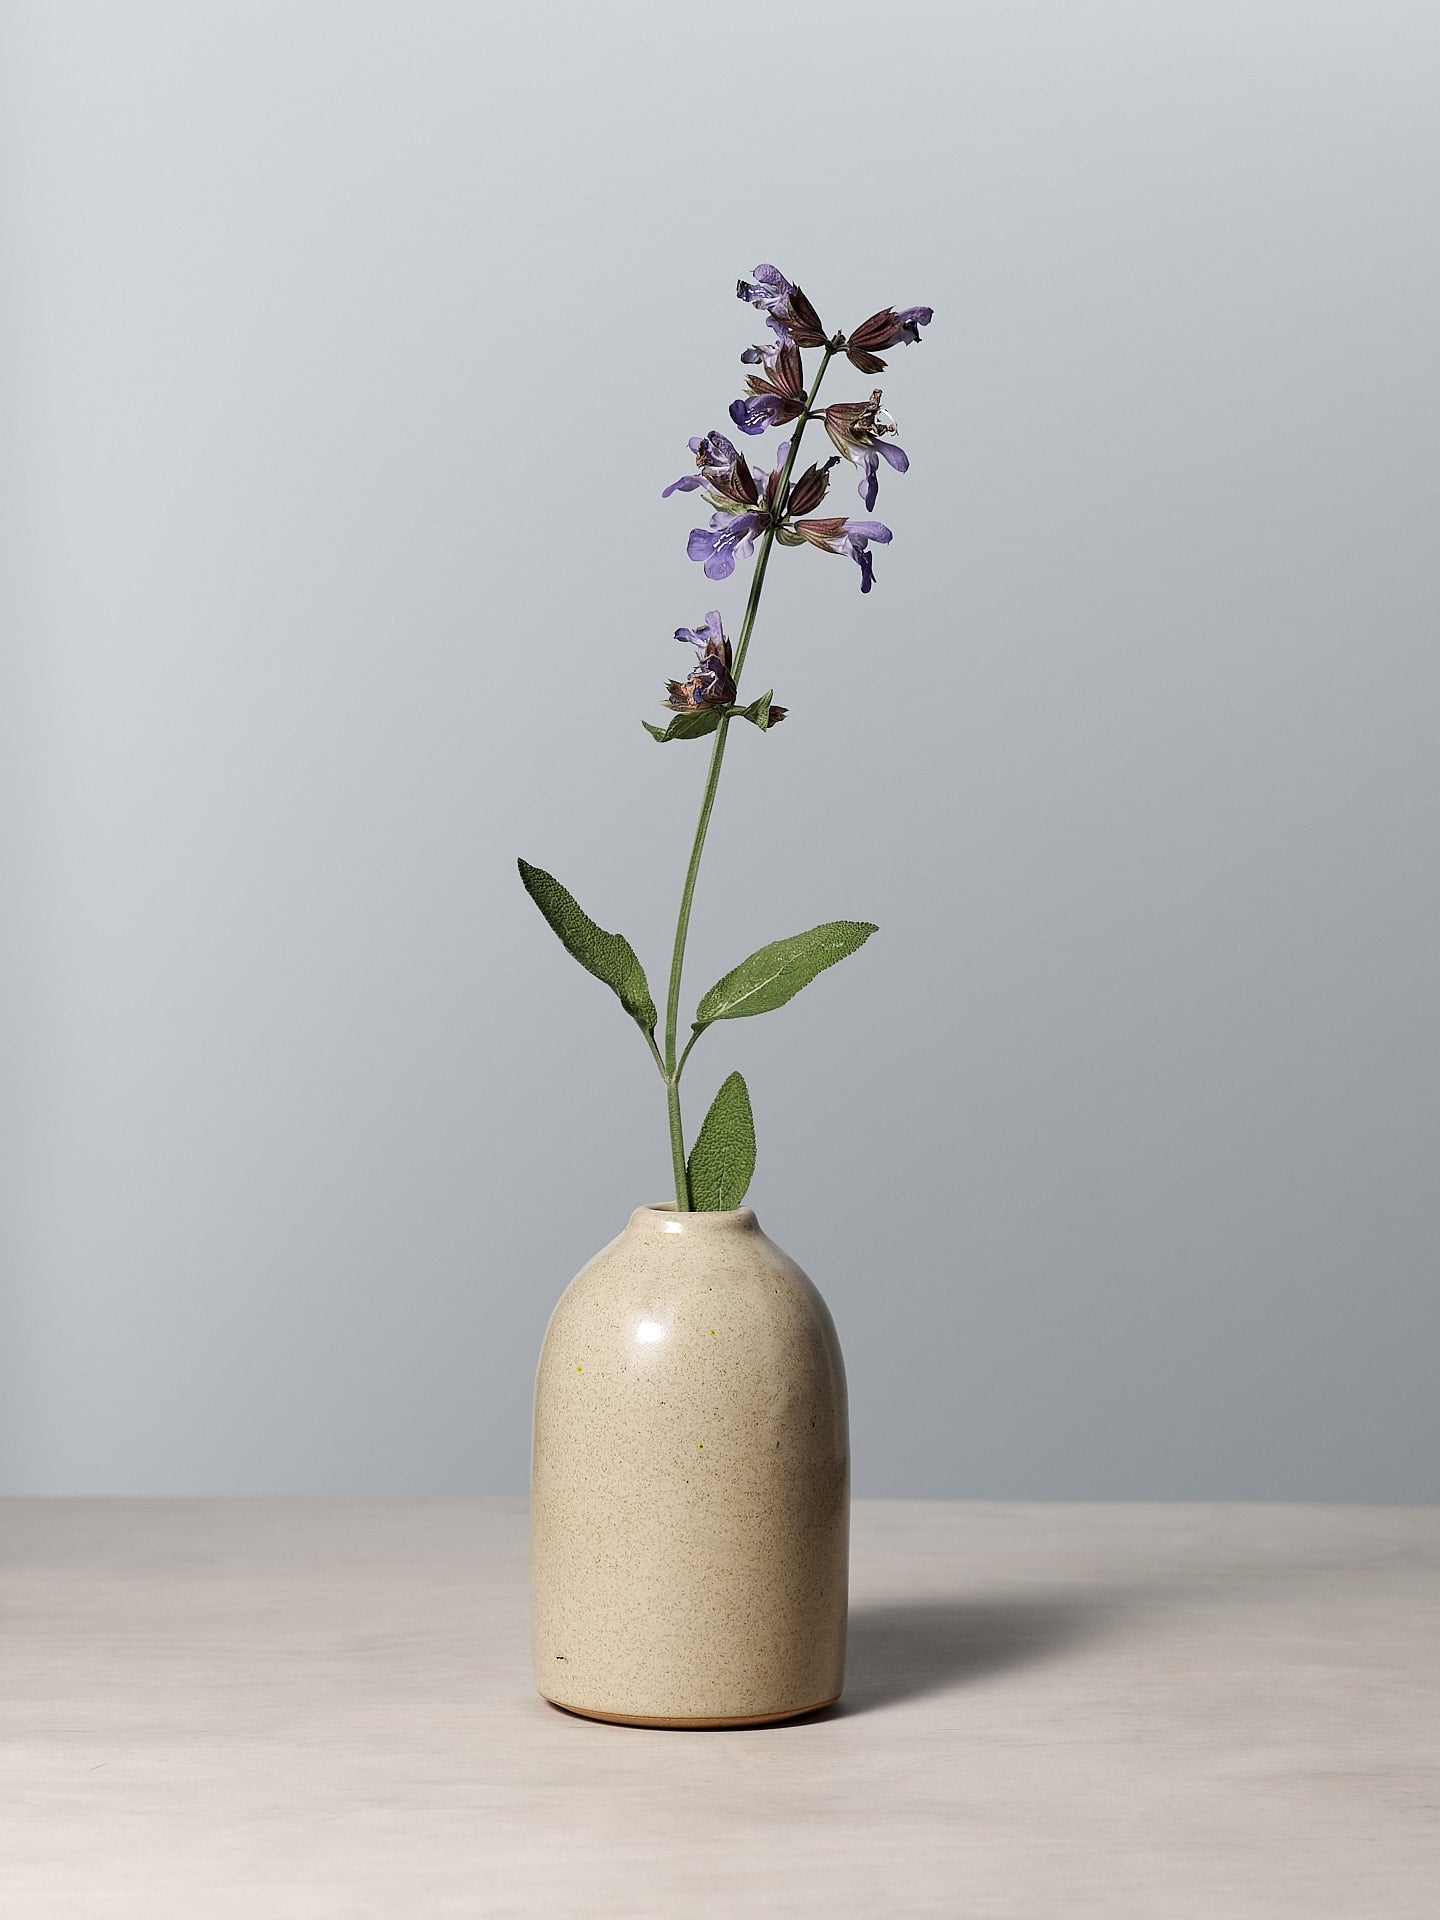 A Richard Beauchamp small bud vase with a purple flower in it.